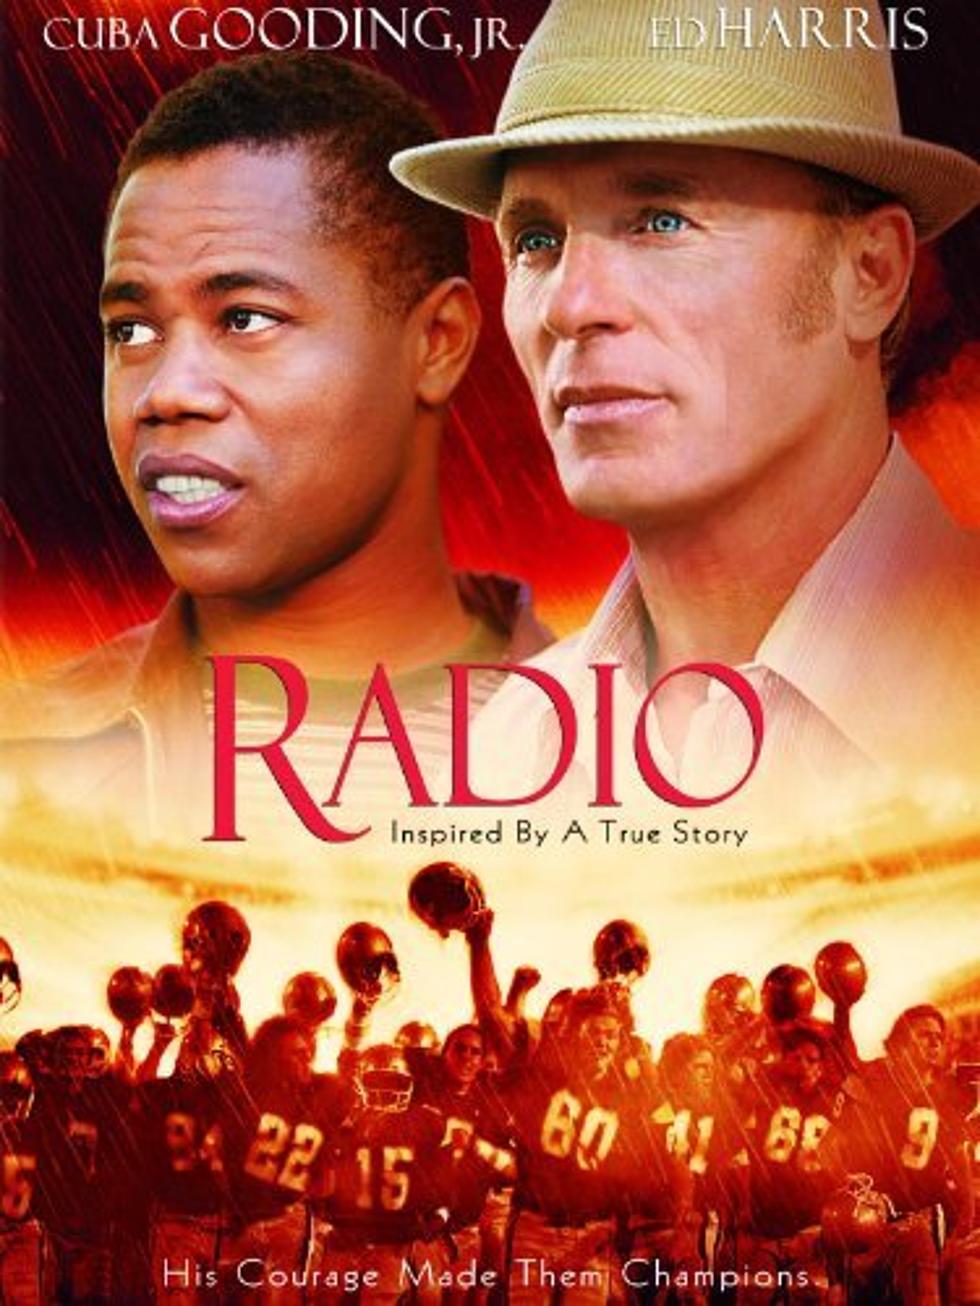 This Friday Night’s FREE Downtown Movie is “Radio”